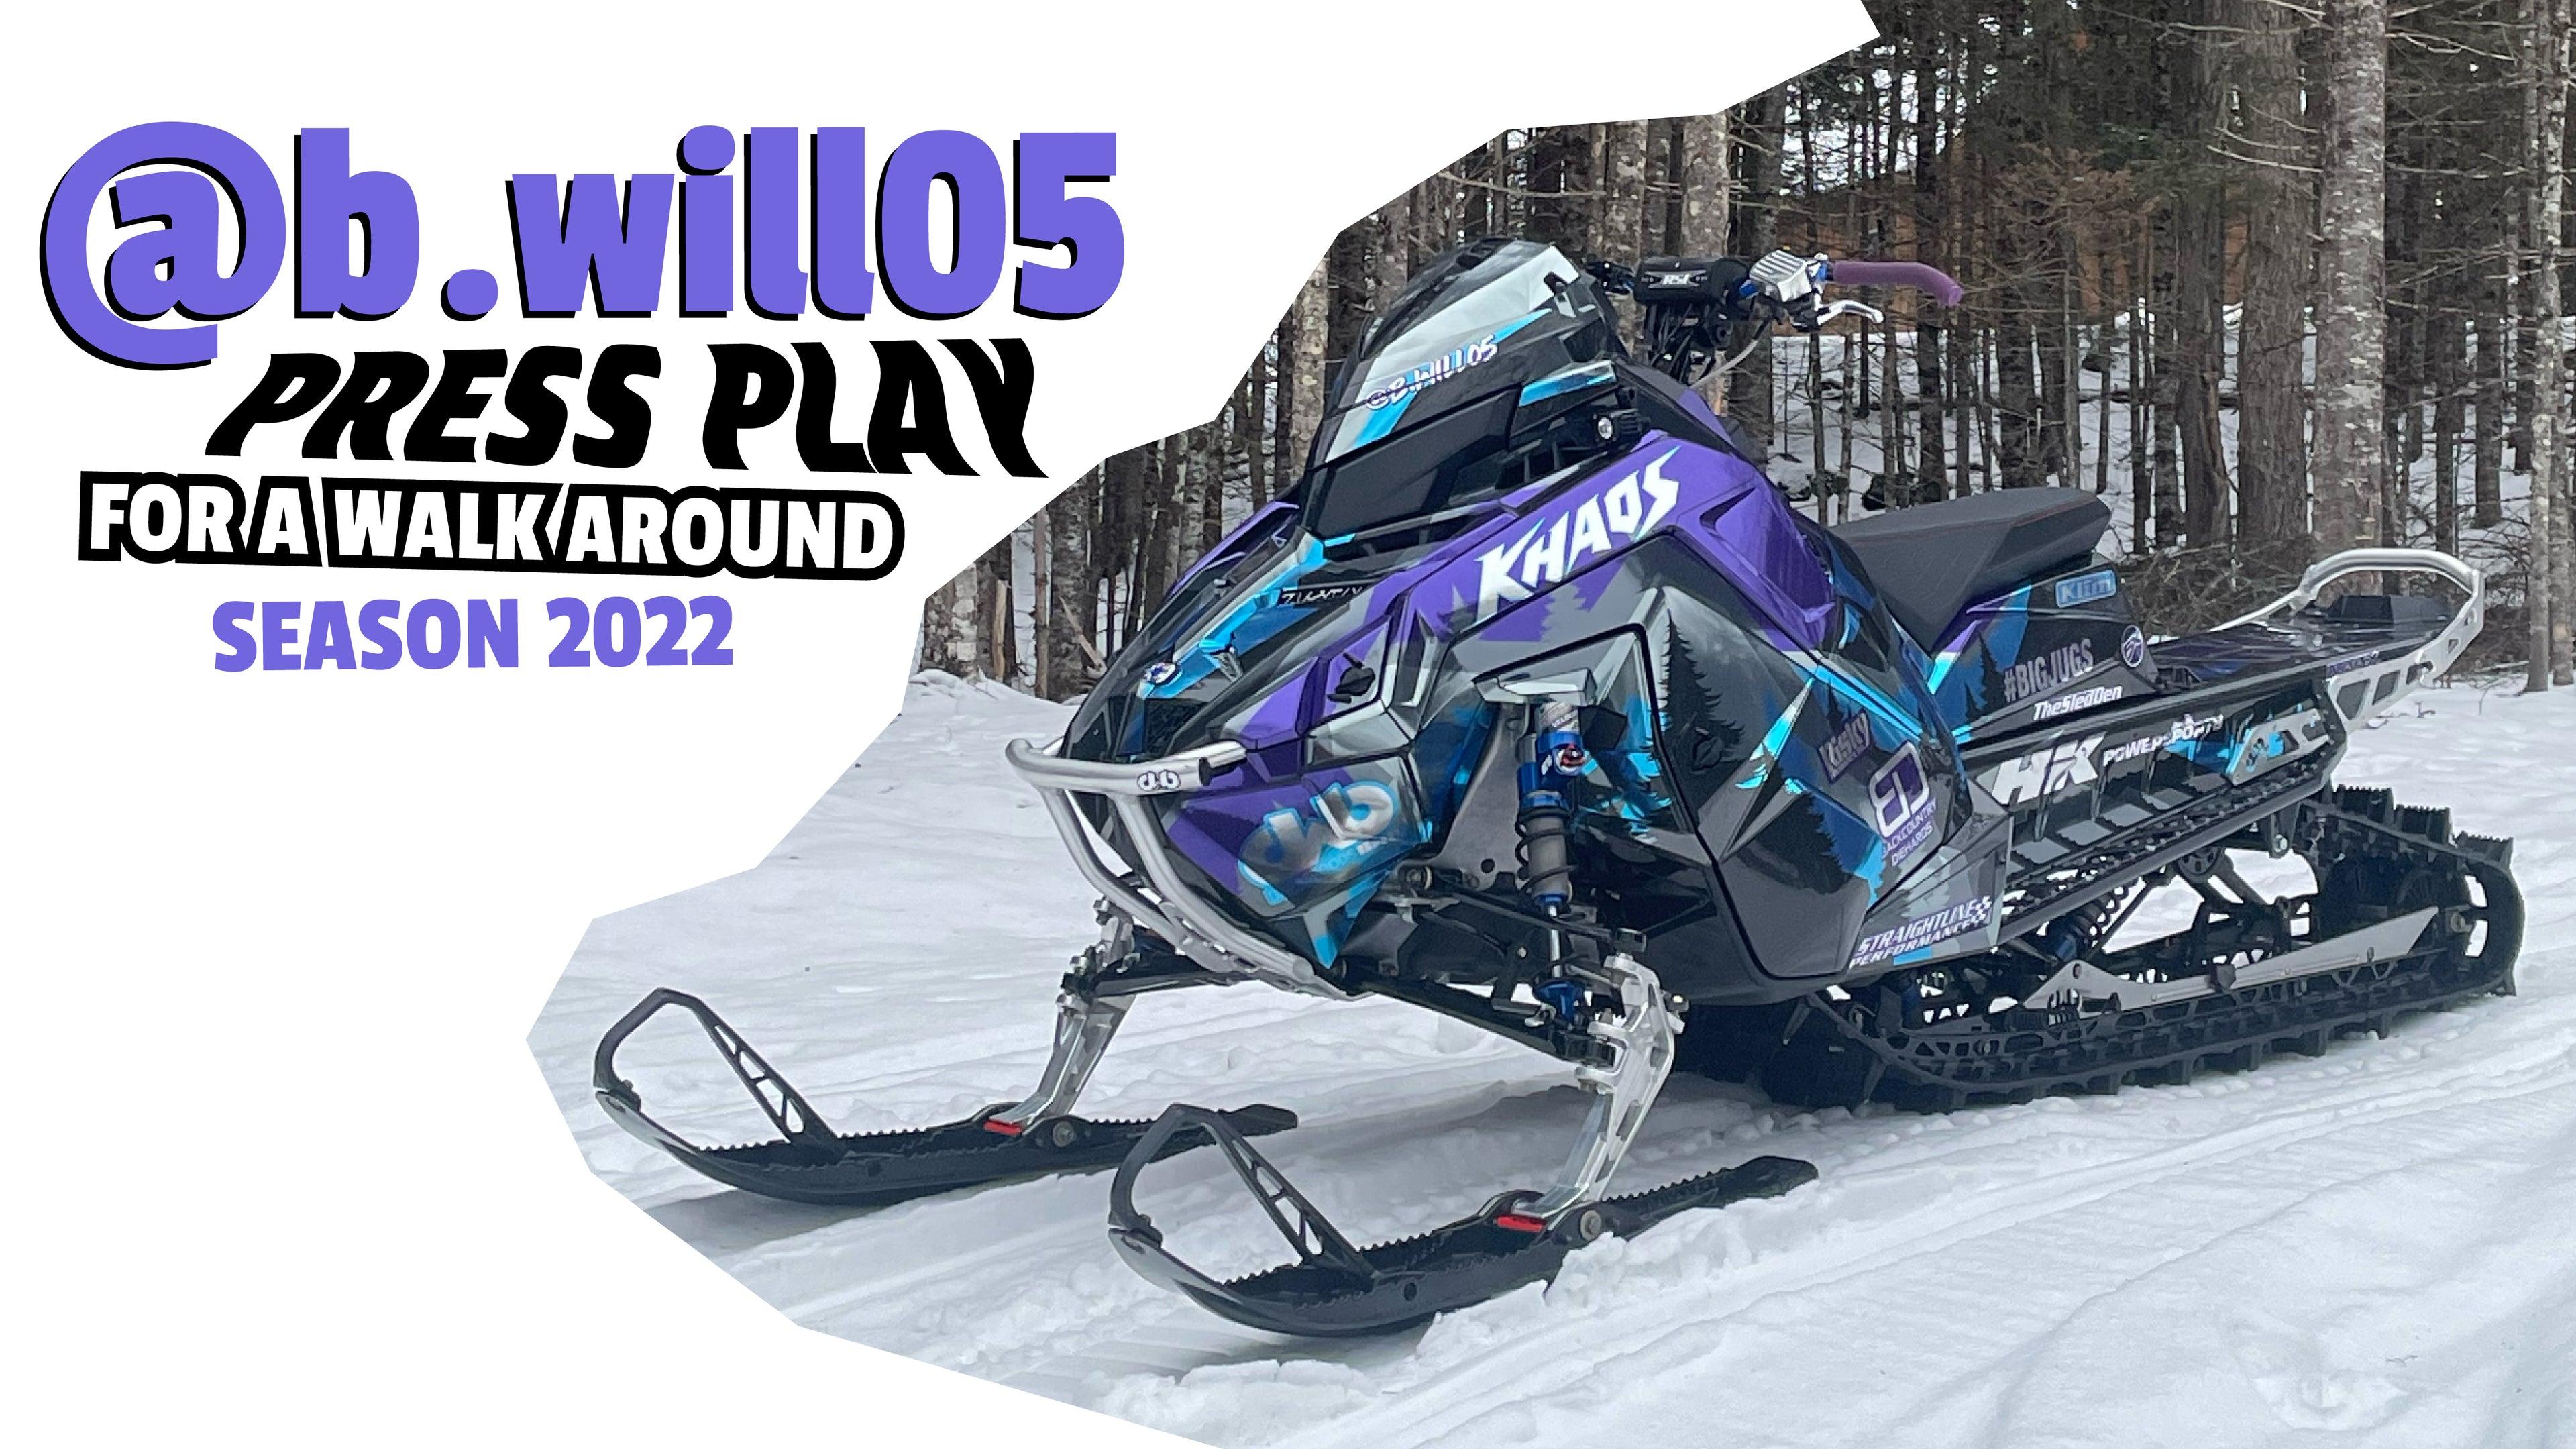 Load video: walk around video showcasing a fresh purple wrapped polaris khaos with a sled wrap from arcticfx graphics.